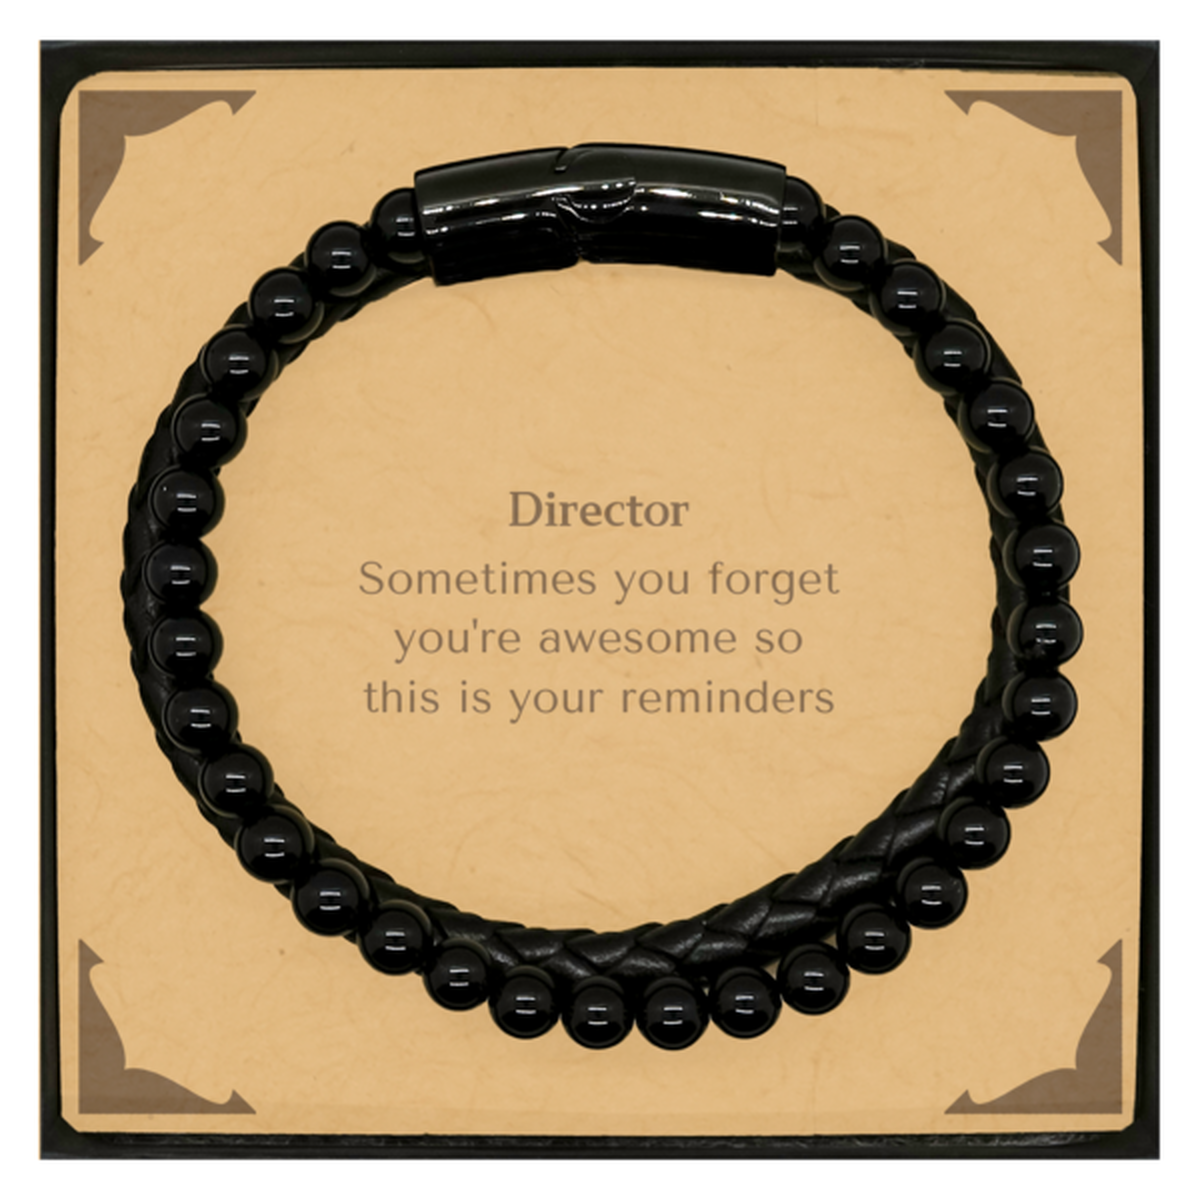 Sentimental Director Stone Leather Bracelets, Director Sometimes you forget you're awesome so this is your reminders, Graduation Christmas Birthday Gifts for Director, Men, Women, Coworkers